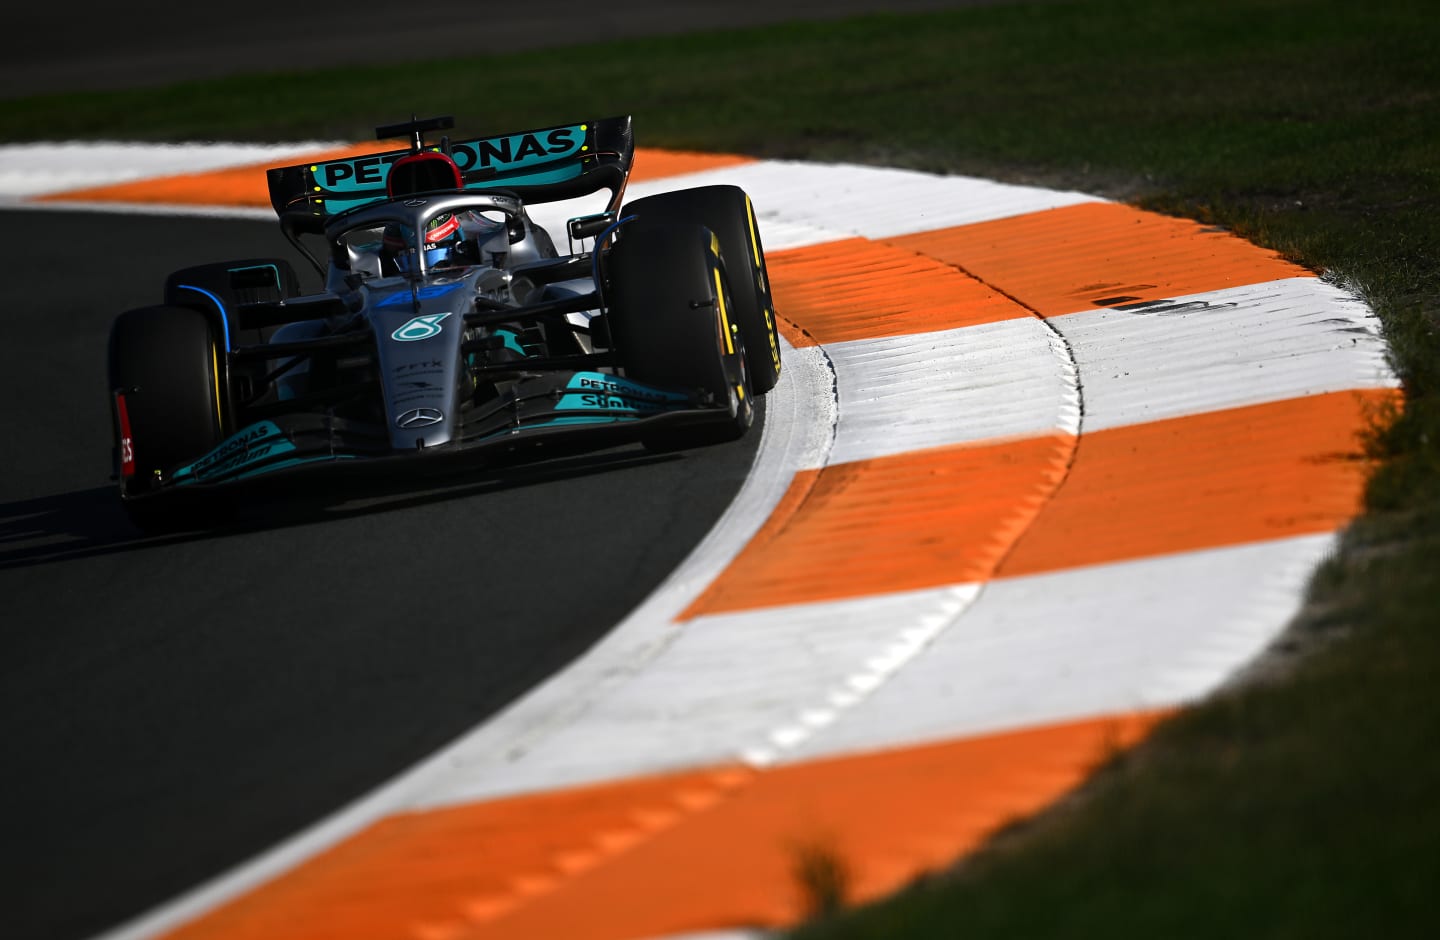 ZANDVOORT, NETHERLANDS - SEPTEMBER 02: George Russell of Great Britain driving the (63) Mercedes AMG Petronas F1 Team W13 on track during practice ahead of the F1 Grand Prix of The Netherlands at Circuit Zandvoort on September 02, 2022 in Zandvoort, Netherlands. (Photo by Clive Mason/Getty Images)